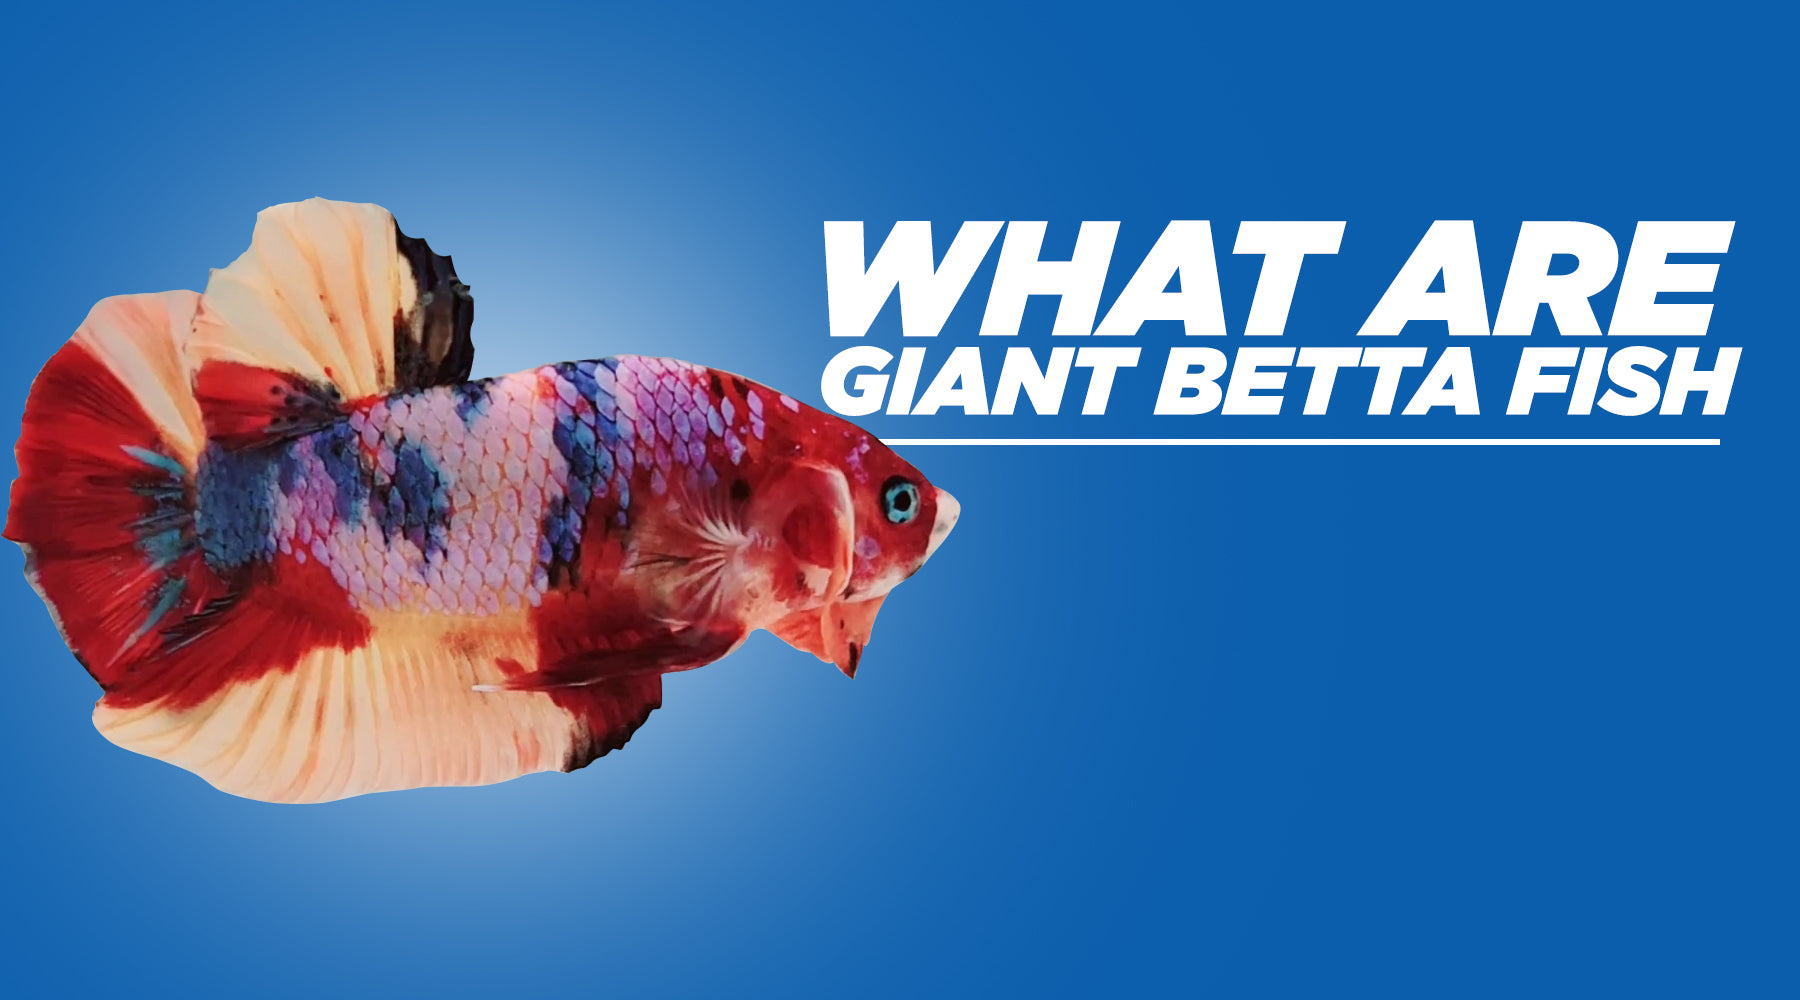 What are Giant Betta Fish